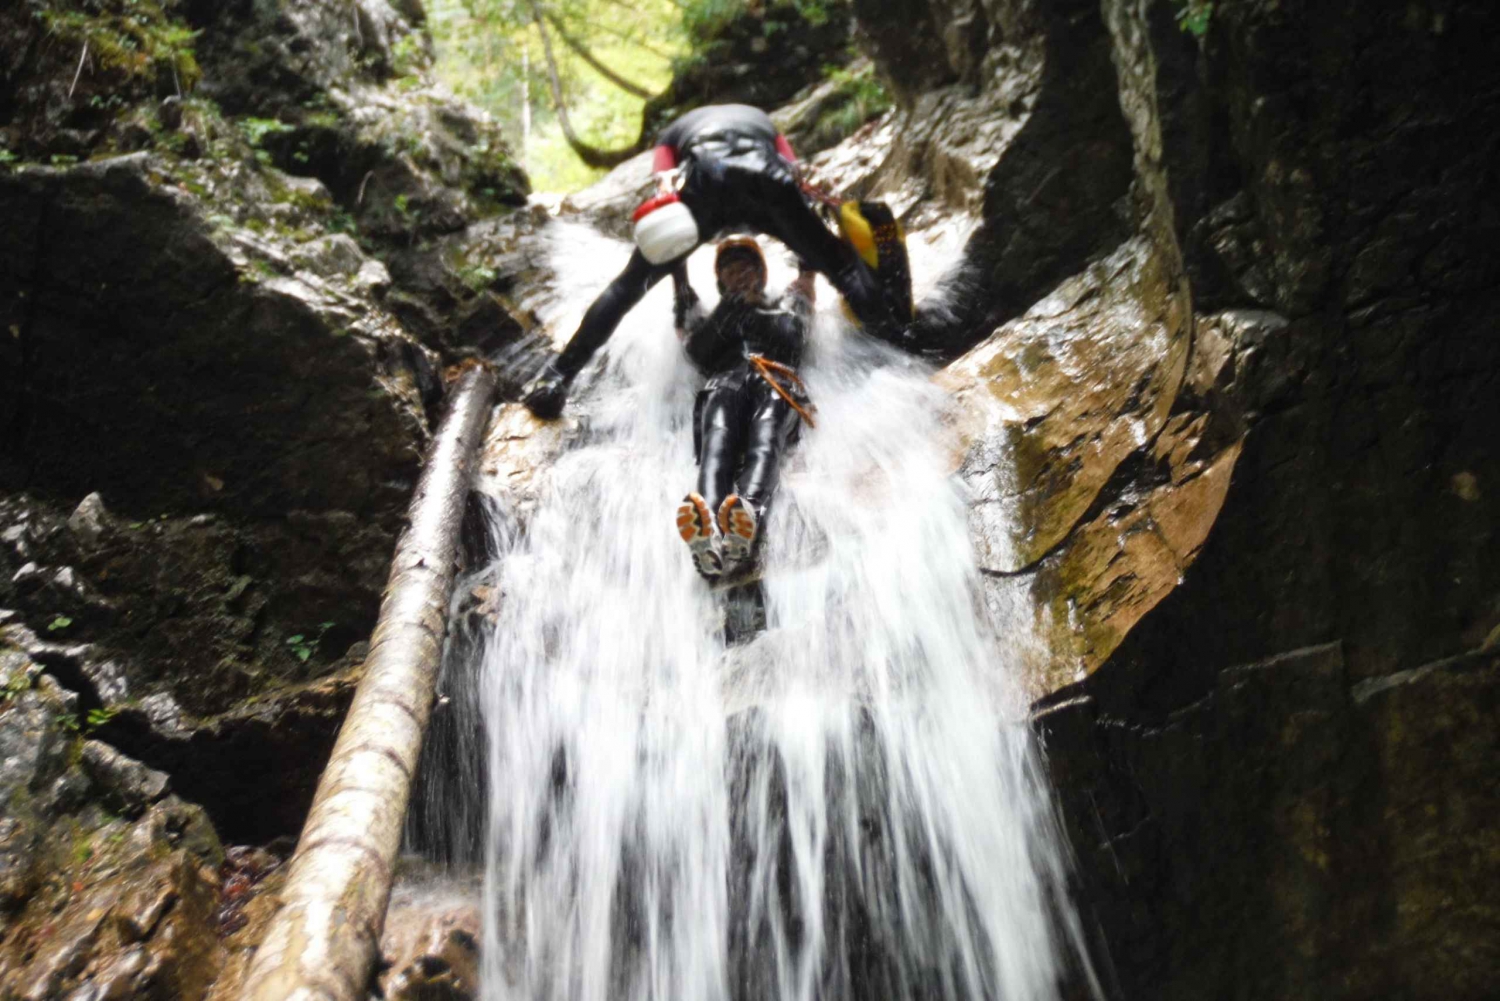 Bovec: Canyoning in Triglav National Park Tour + Photos